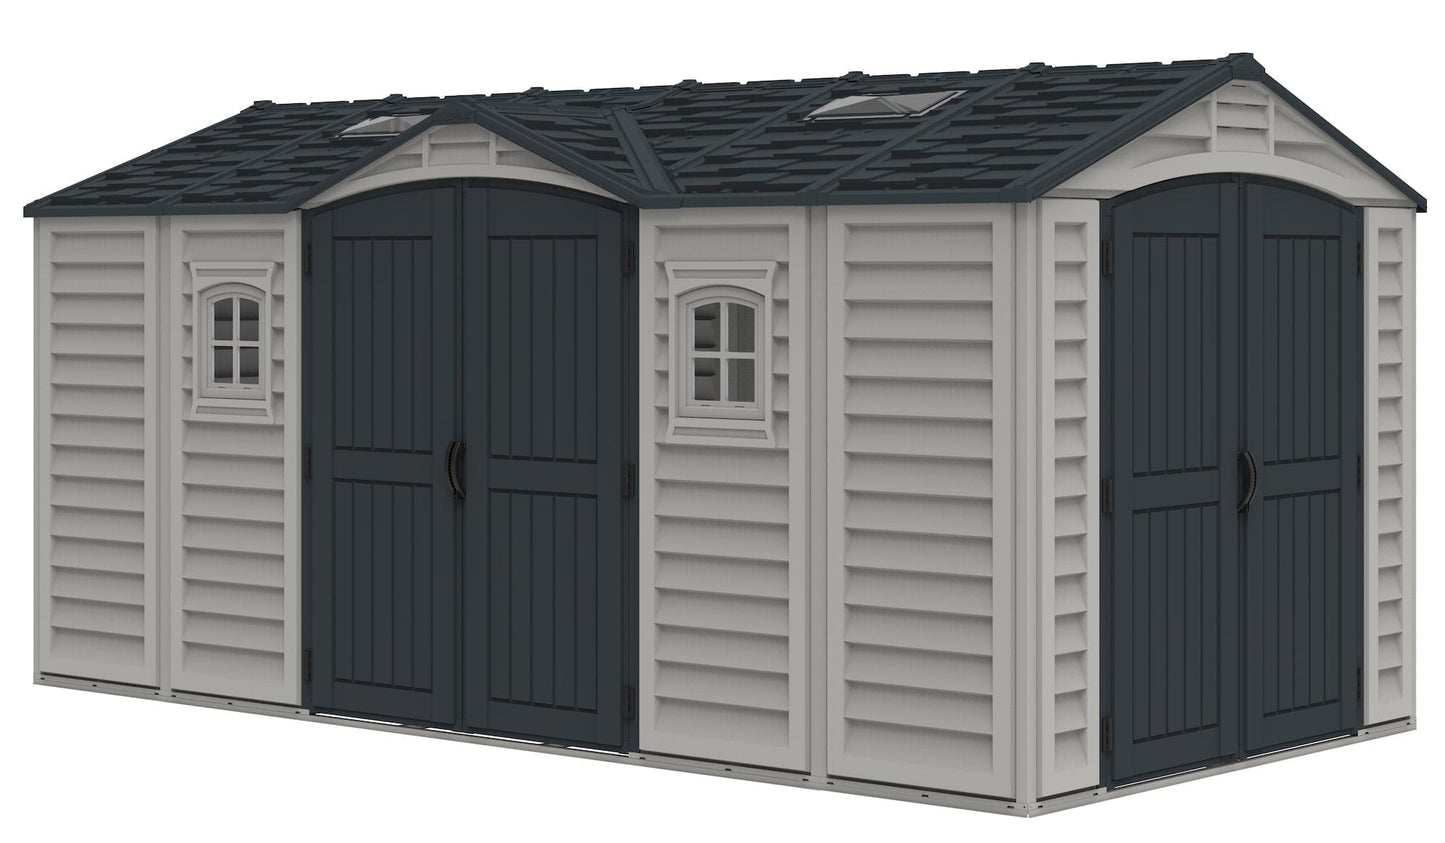 DuraMax Vinyl Shed 15 x 8 Apex Pro with Foundation Kit